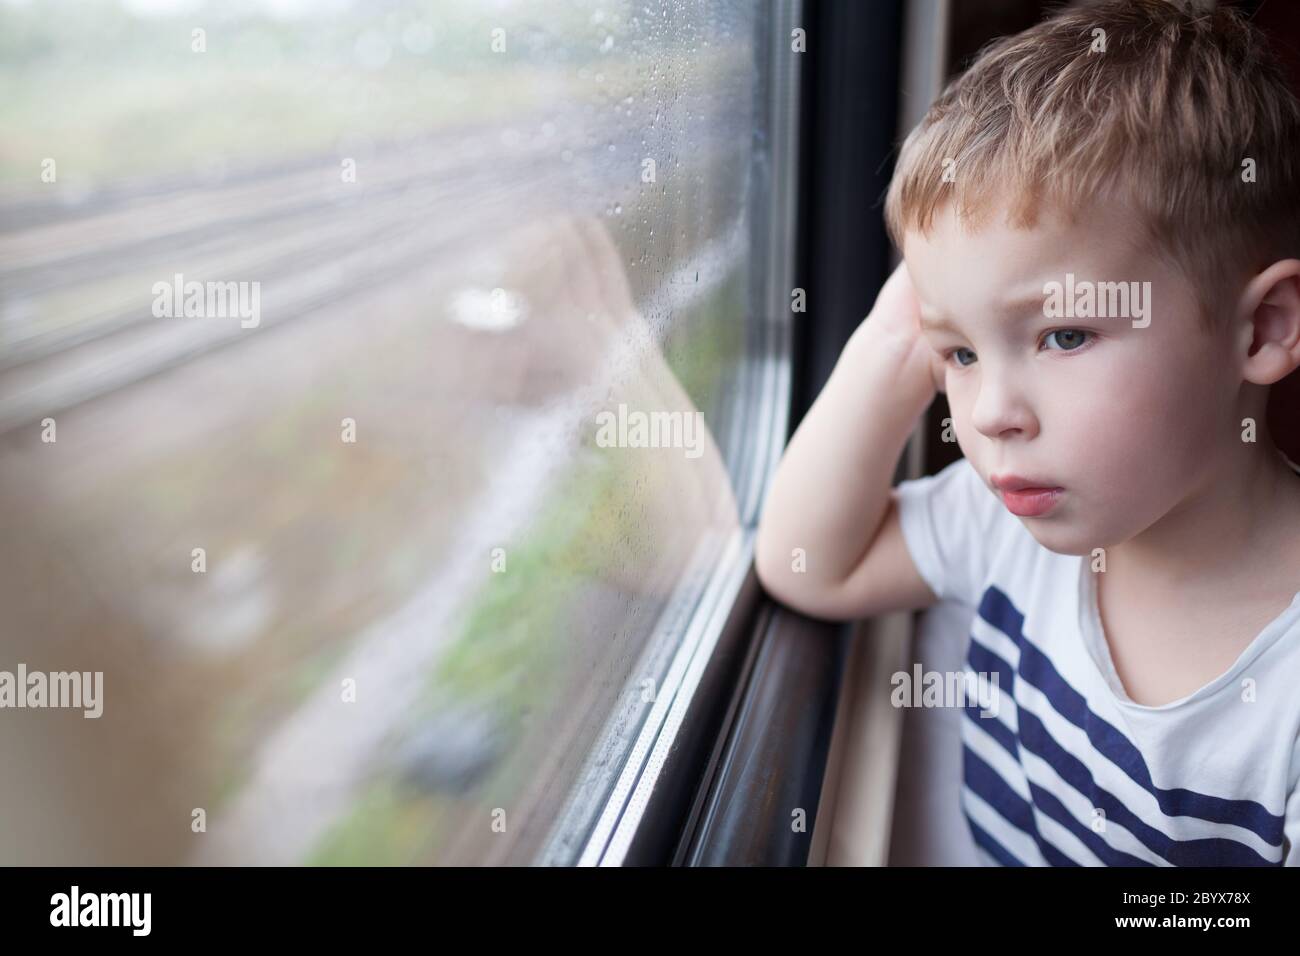 Boy looking out the window of train Stock Photo